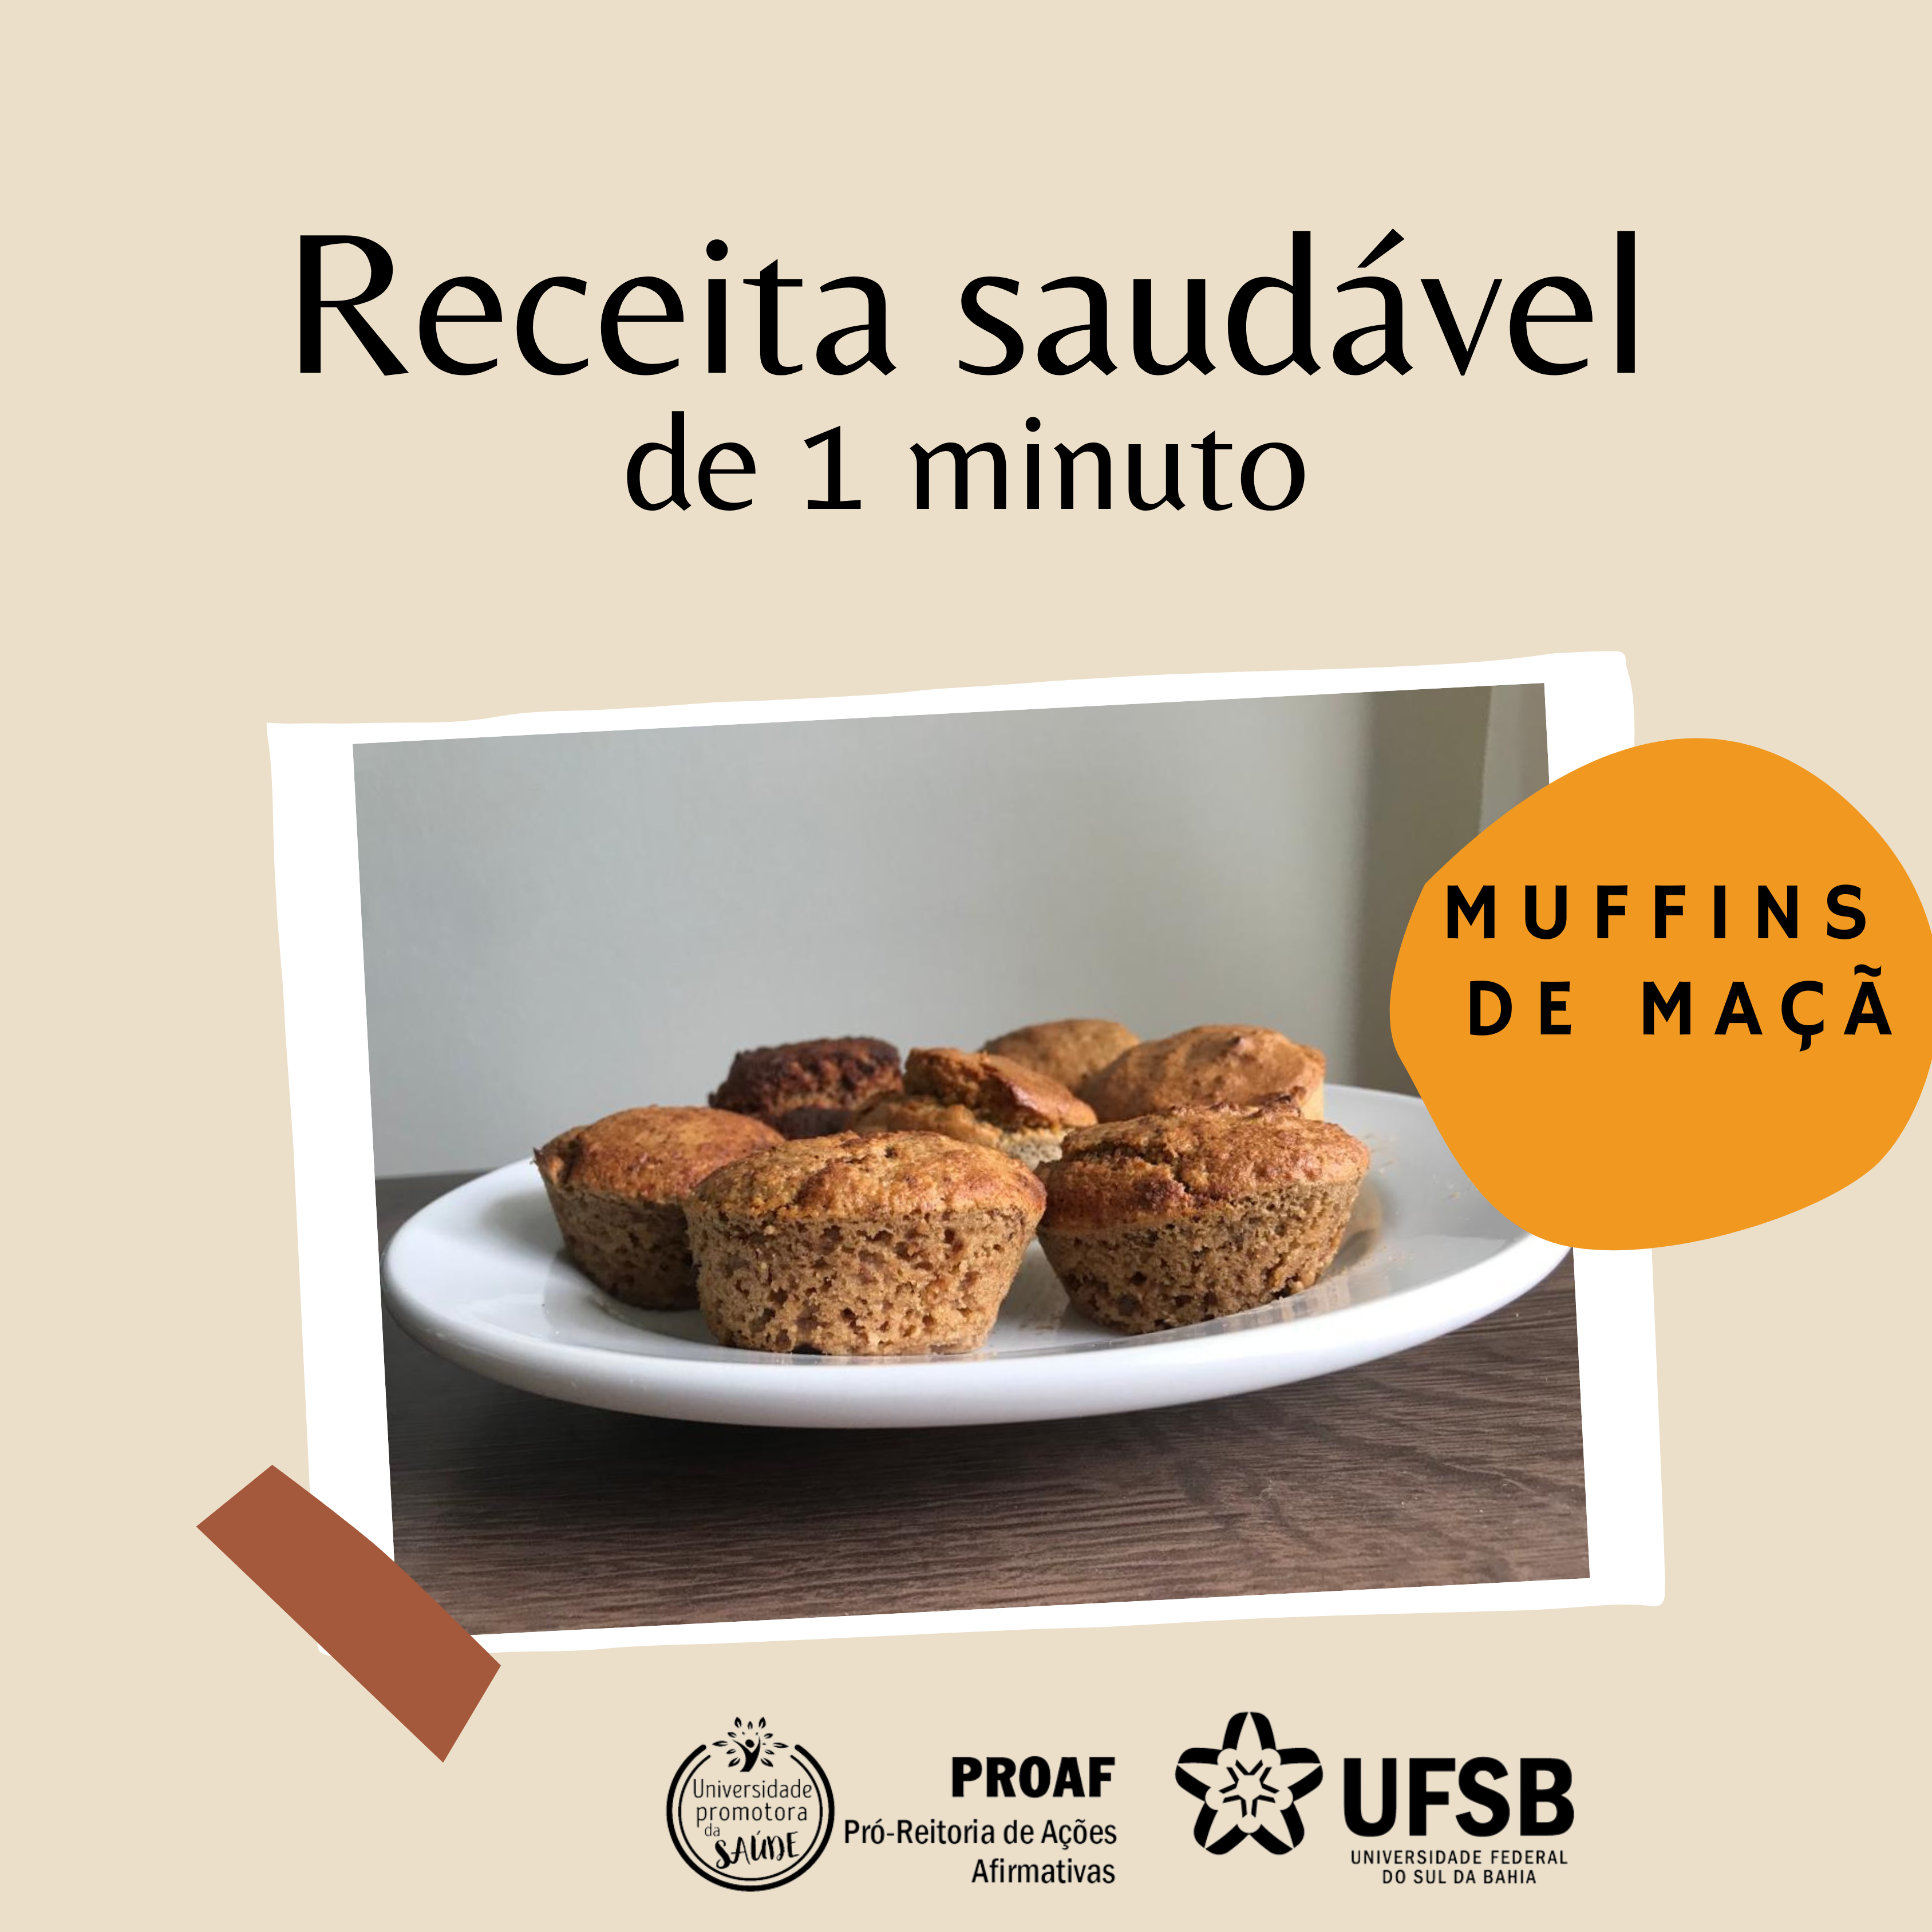 Muffin.png